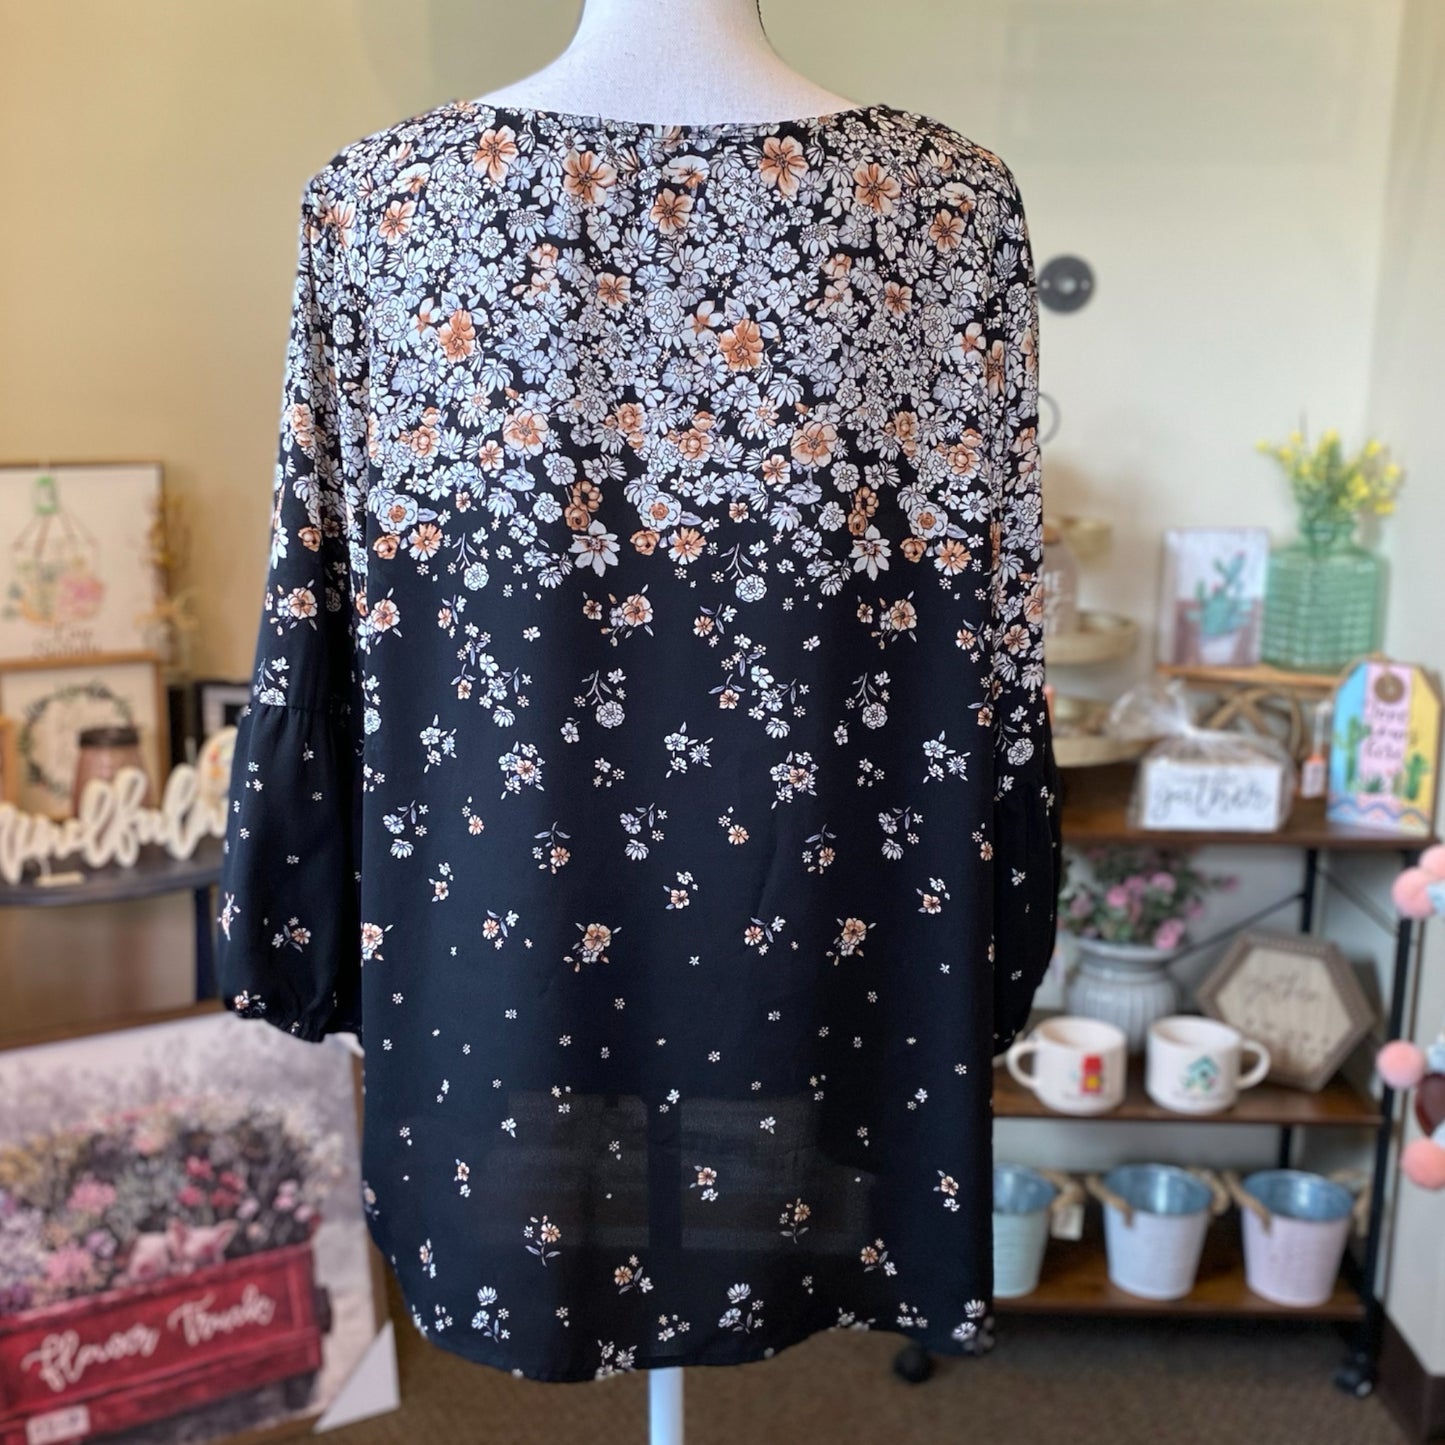 Floral Bell Sleeve V-Neck Top - Size 1X